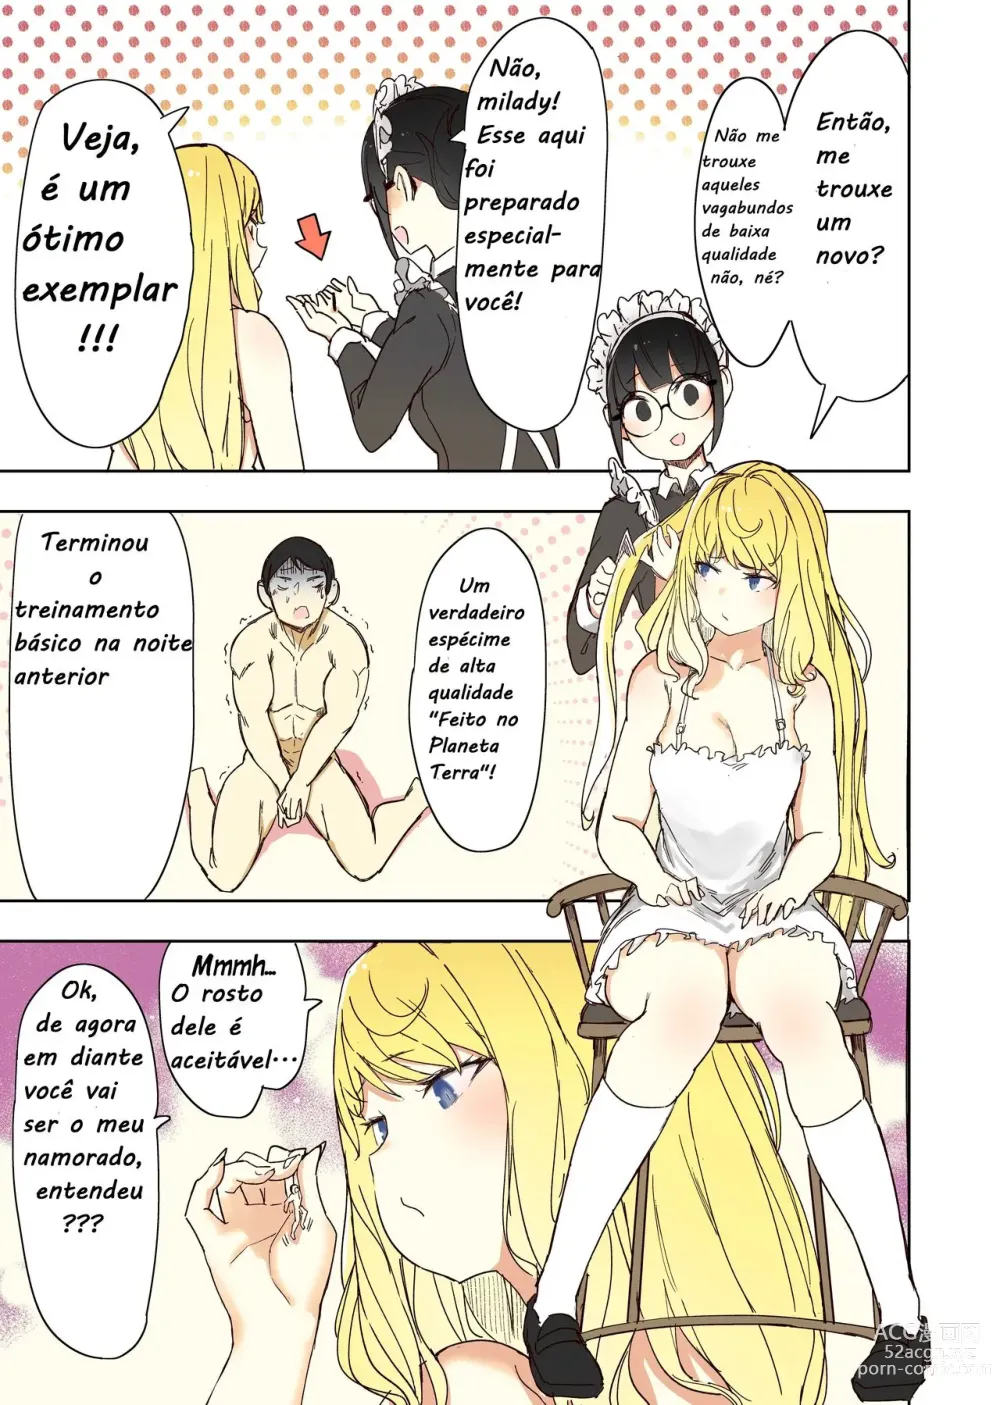 Page 1 of doujinshi A new boyfriend - PT-BR